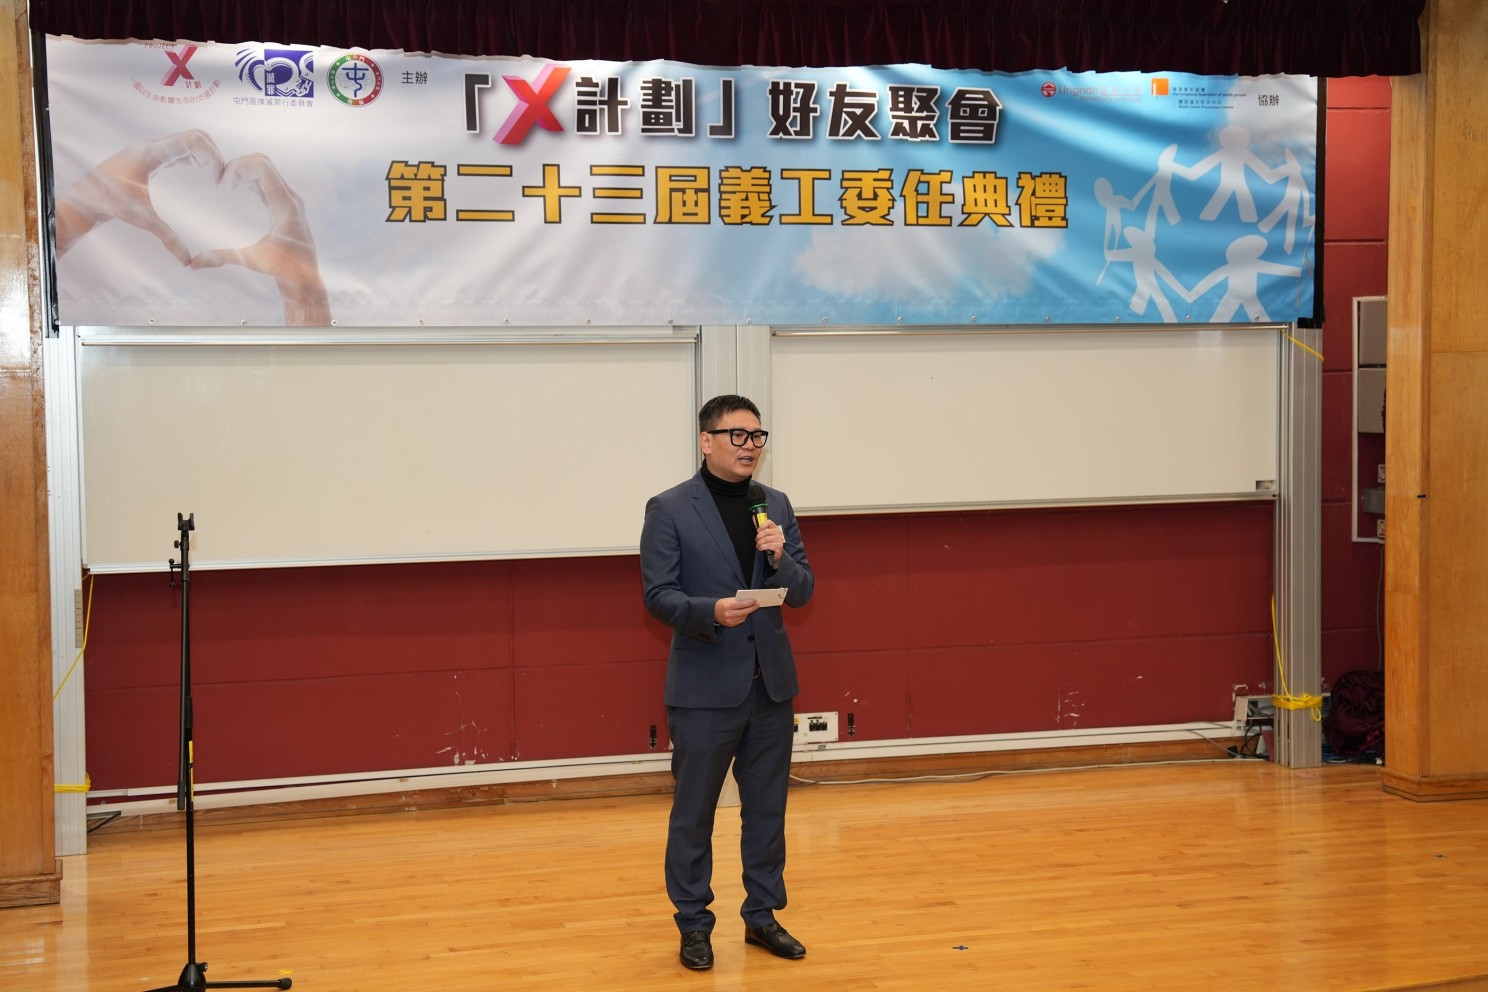 Volunteer inauguration ceremony of the 23rd Project X encourages youth at risk in Tuen Mun to reintegrate into the community